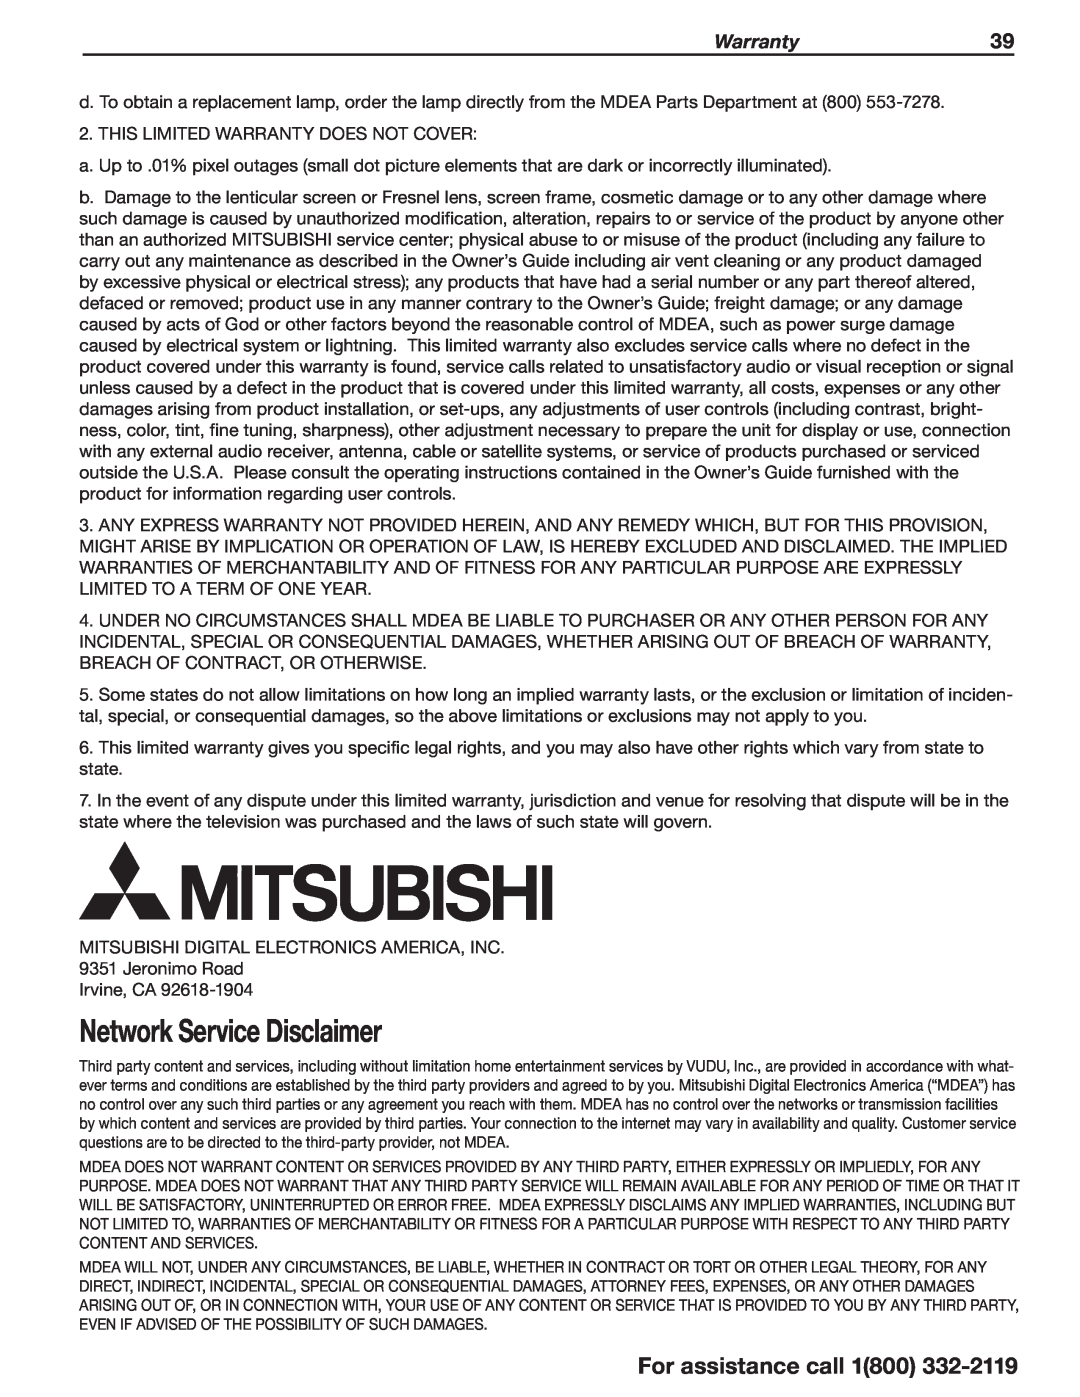 Mitsubishi Electronics 838 manual Network Service Disclaimer, Warranty39, For assistance call 